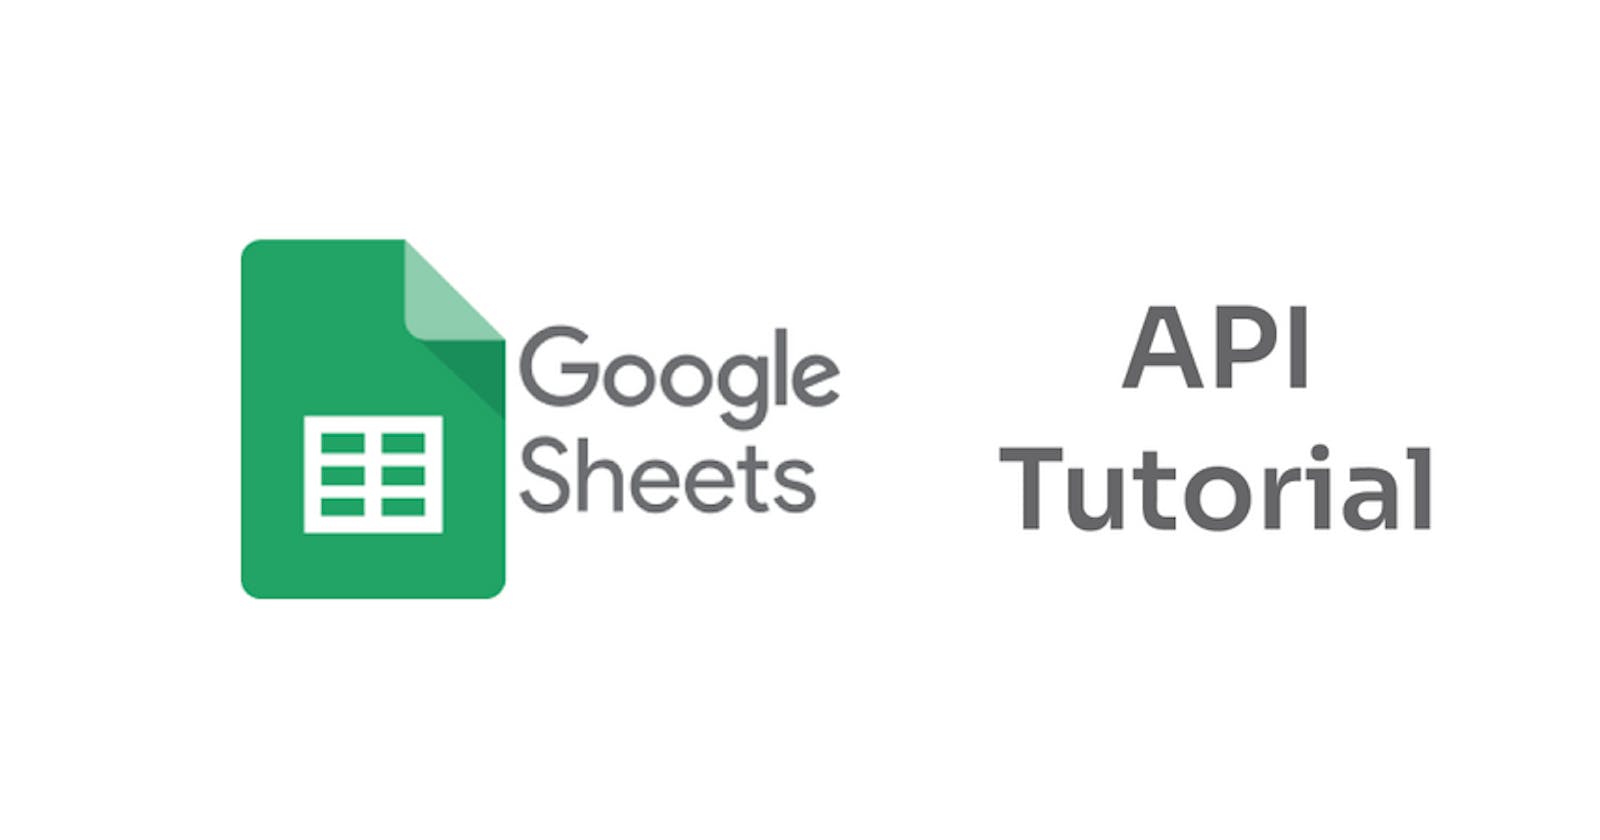 Google Sheets API Tutorial: The Basics You Need to Get Going